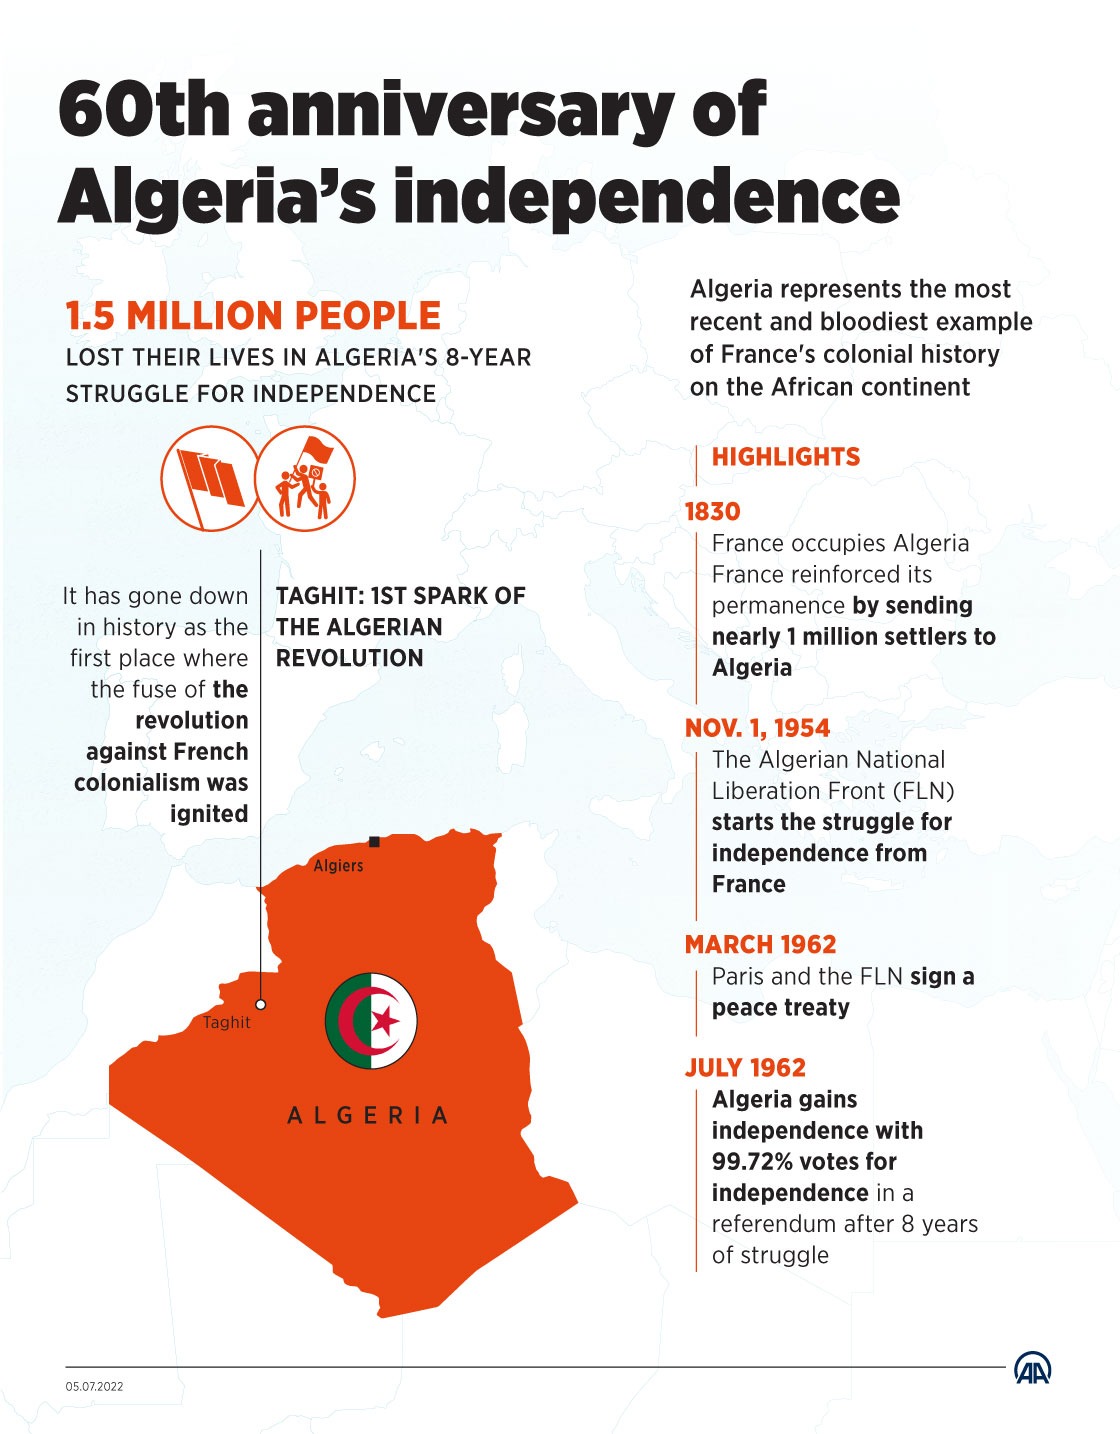 60th anniversary of Algeria’s independence